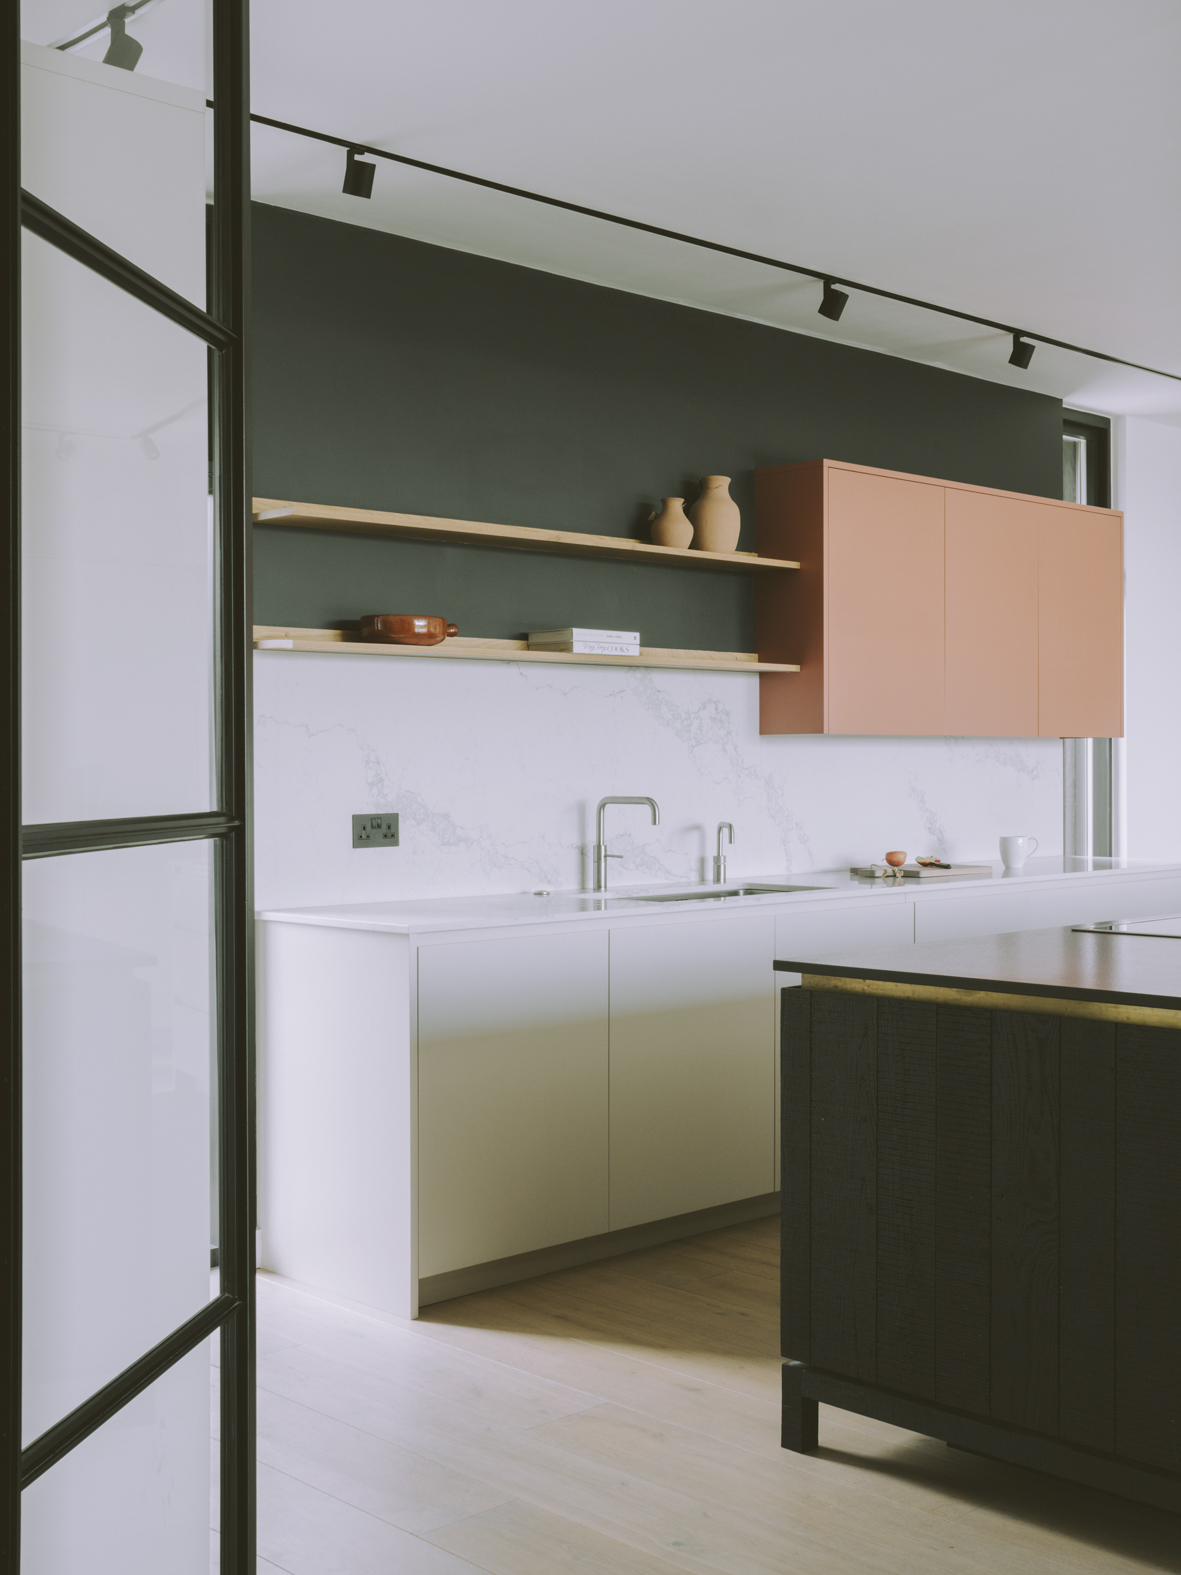 Chelwood house's kitchen with a black island, surrounding white units, pink wall units and open shelving.